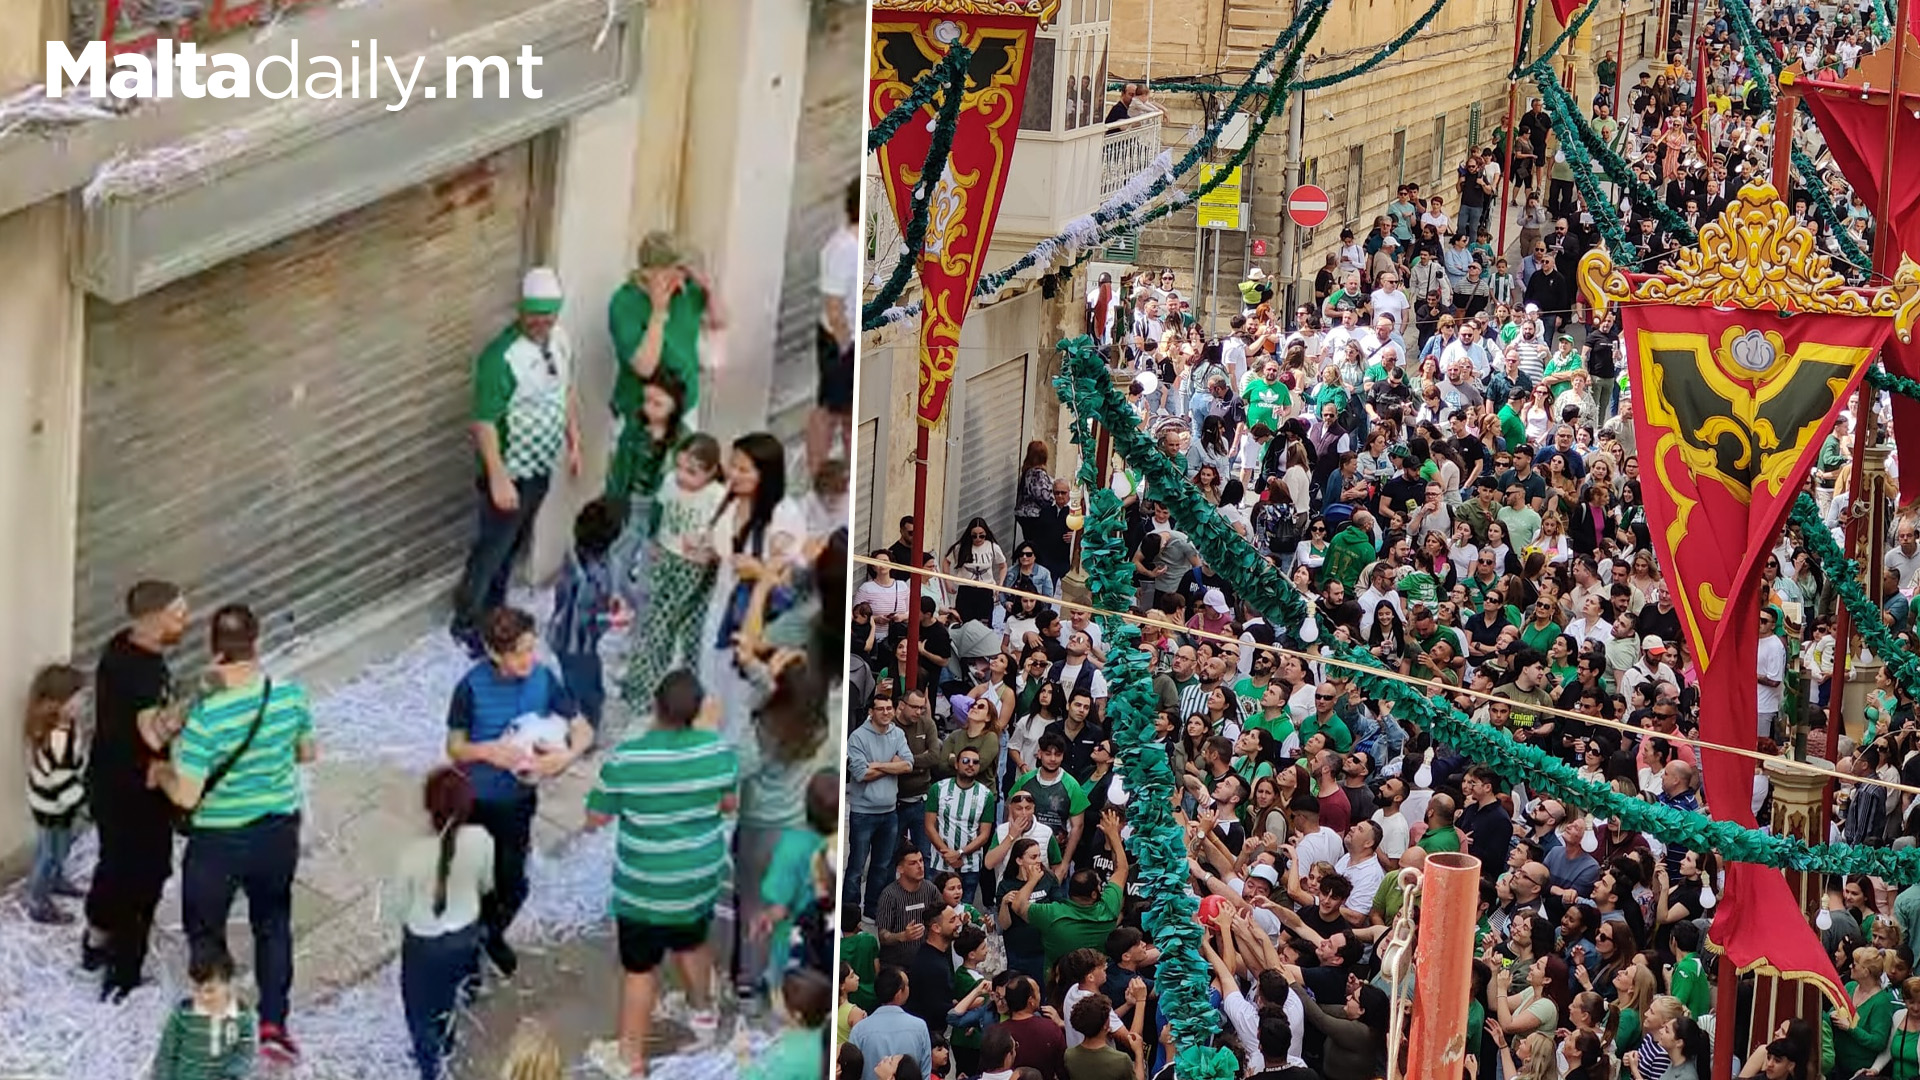 Tradition Of Throwing Down Toys From Balconies In Floriana Feast